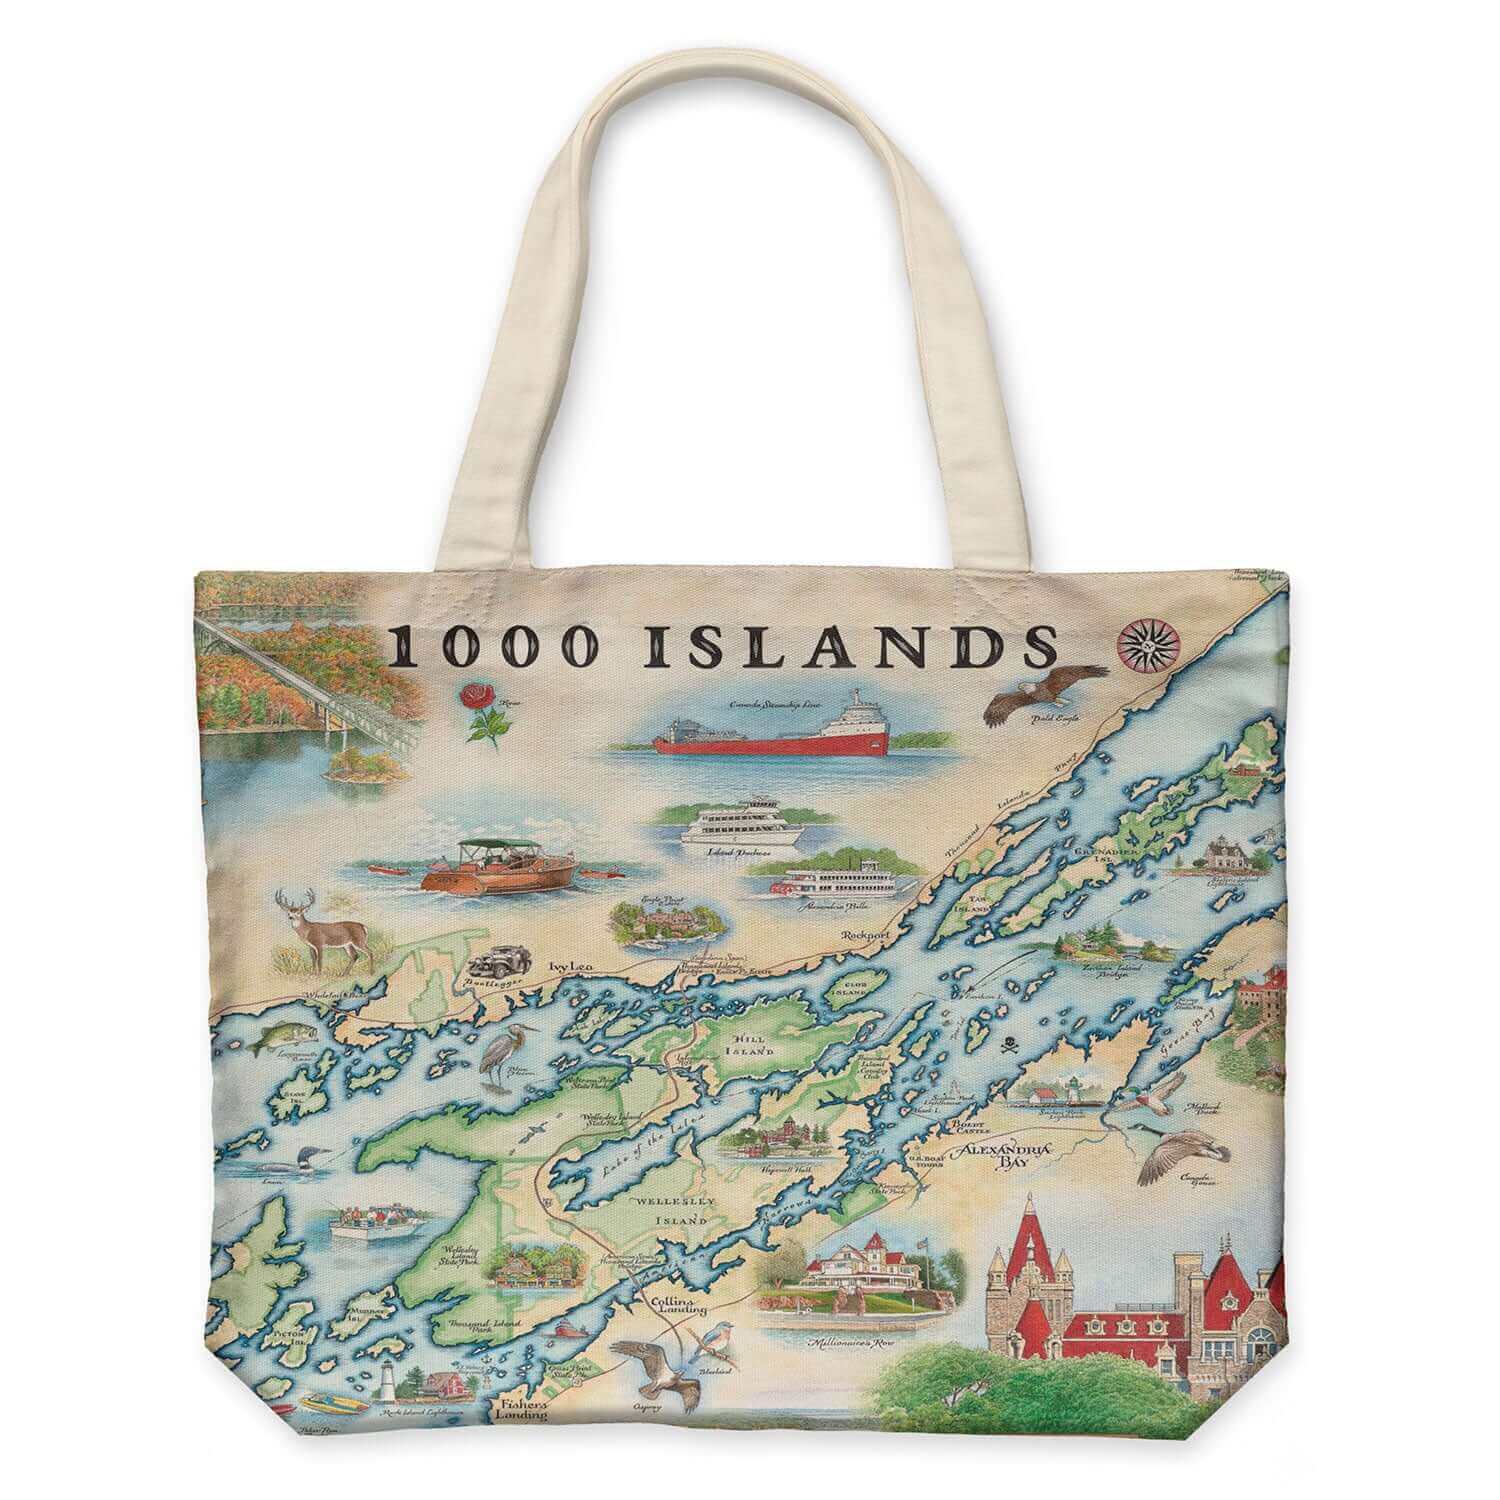 1000 Islands Map Canvas Tote Bag in earth tone colors. Map features Bolt Castle, Singer Castle, Fishers Landing, Millionaires Row, Cruise ships, and Bootleggers. Flora Fauna of birds, Large Mouth Bass, and deer. 